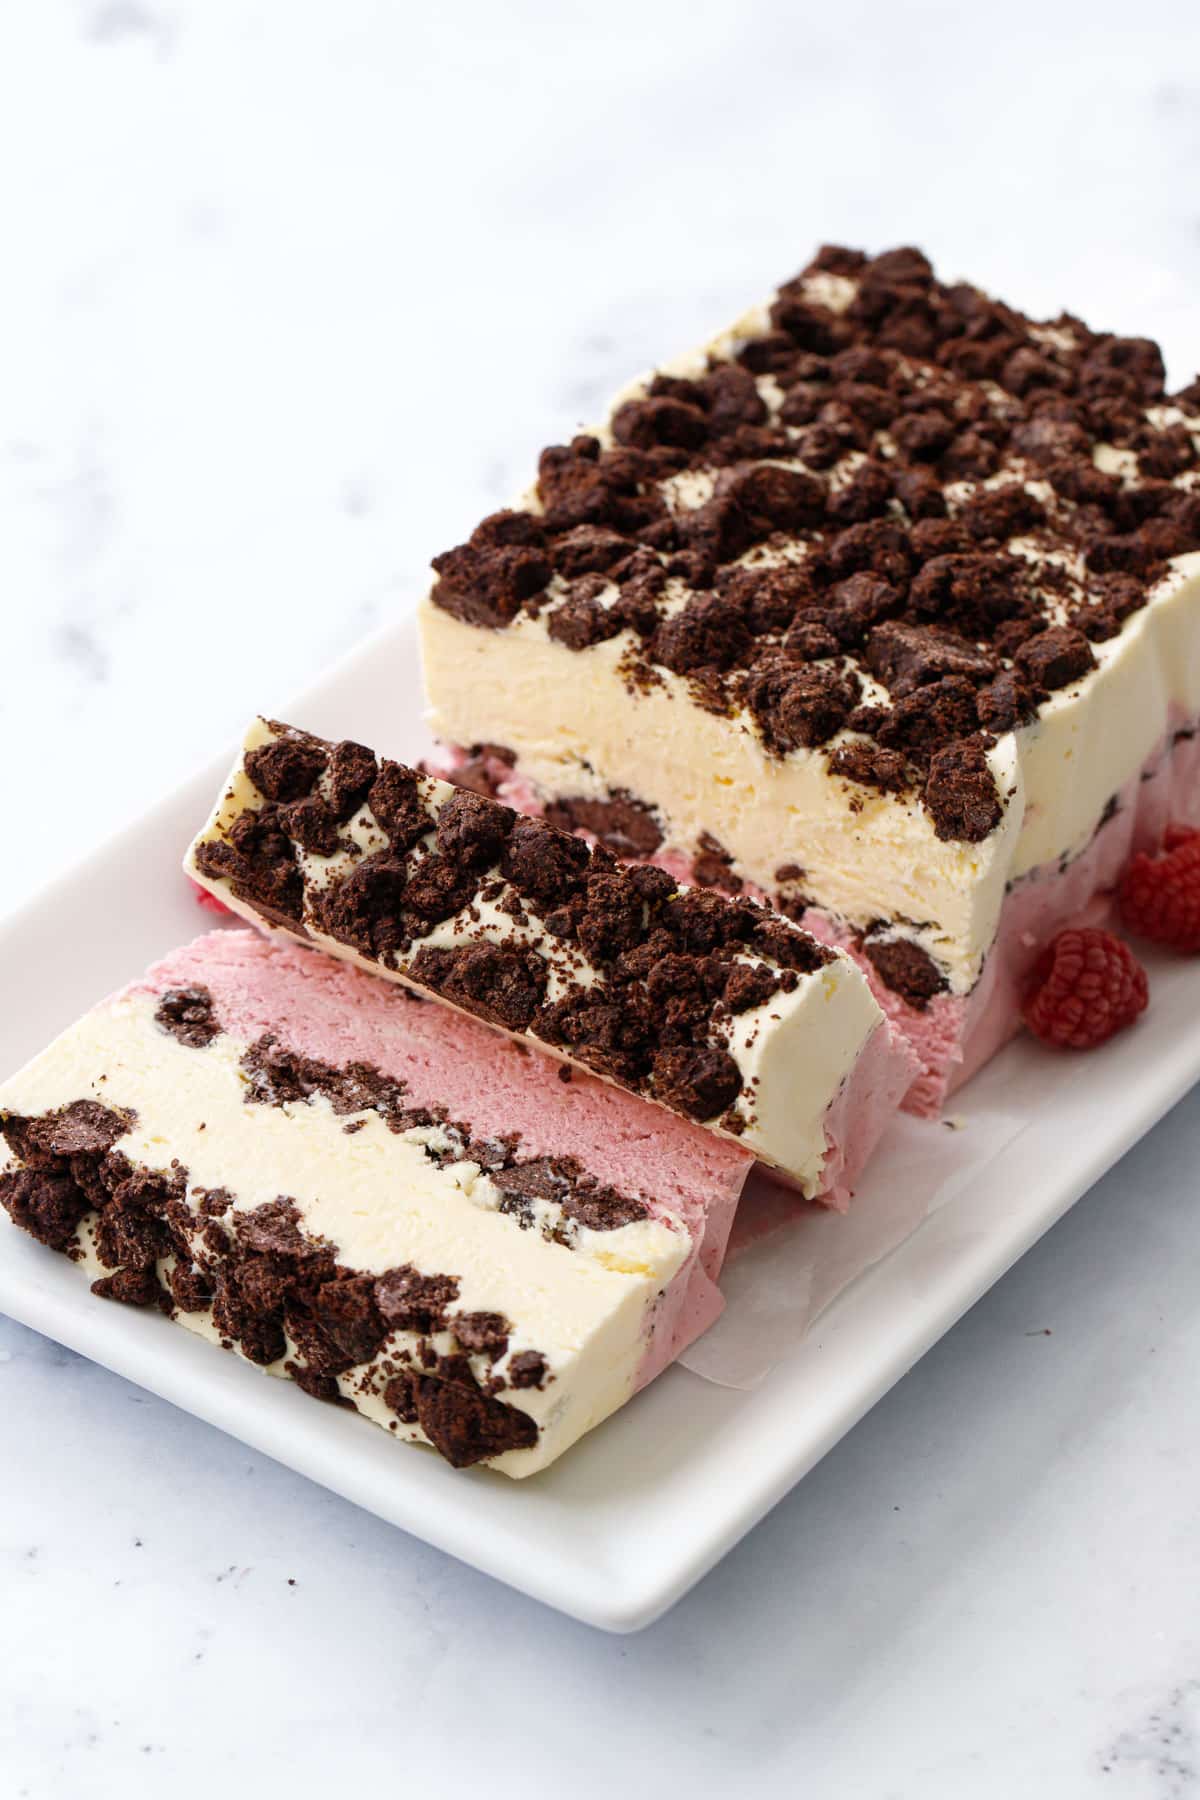 Frozen loaf of Raspberry & Passionfruit Semifreddo with Chocolate Crumbs in between and on top, on a white square plate, two slices laying on their sides.